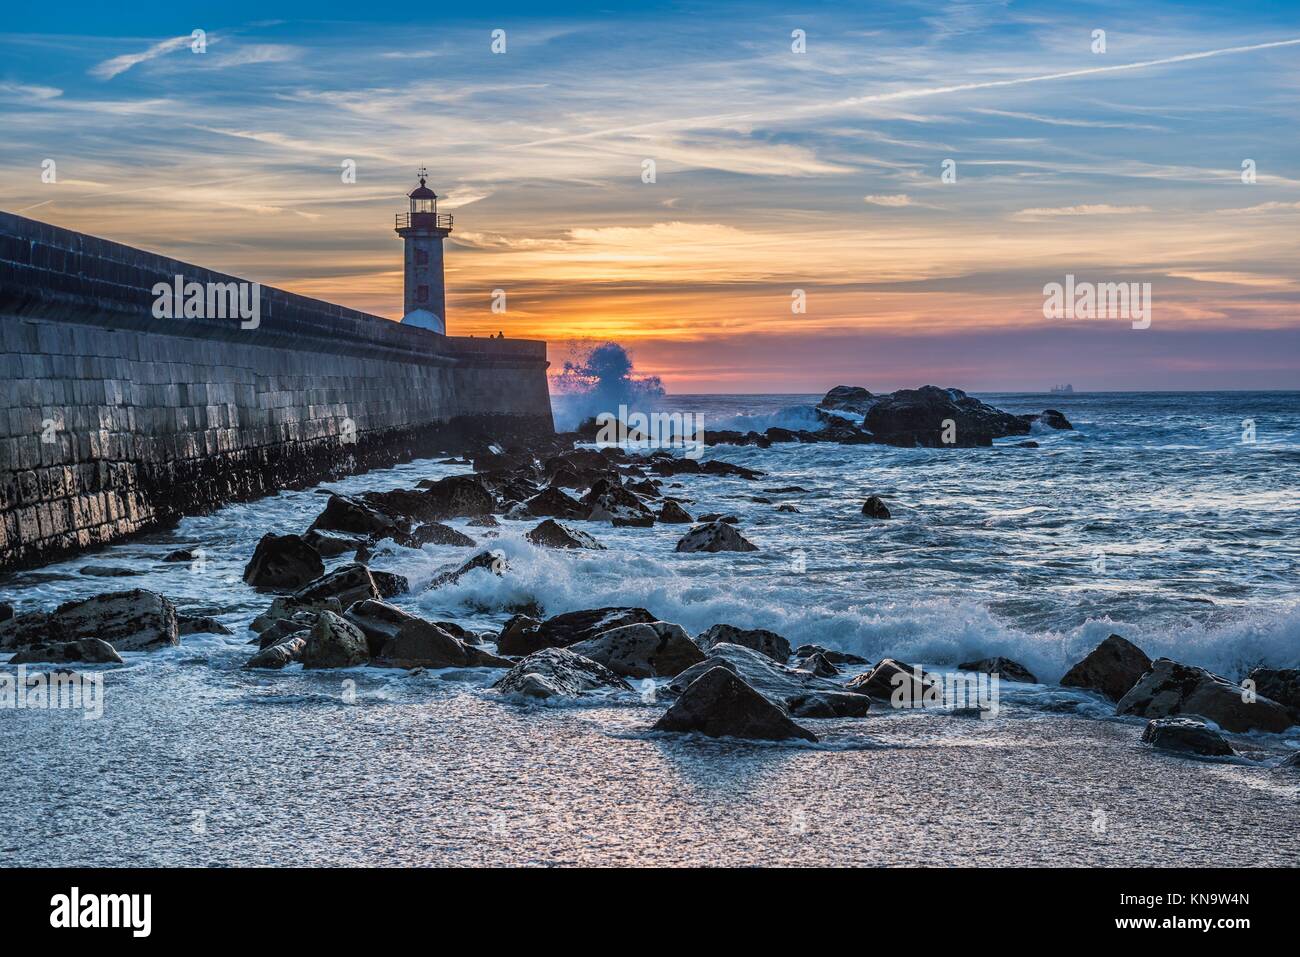 View from Carneiro beach on a Felgueiras Lighthouse during sunset over  Atlantic Ocean in Foz do Douro district of Porto city, Portugal Stock Photo  - Alamy